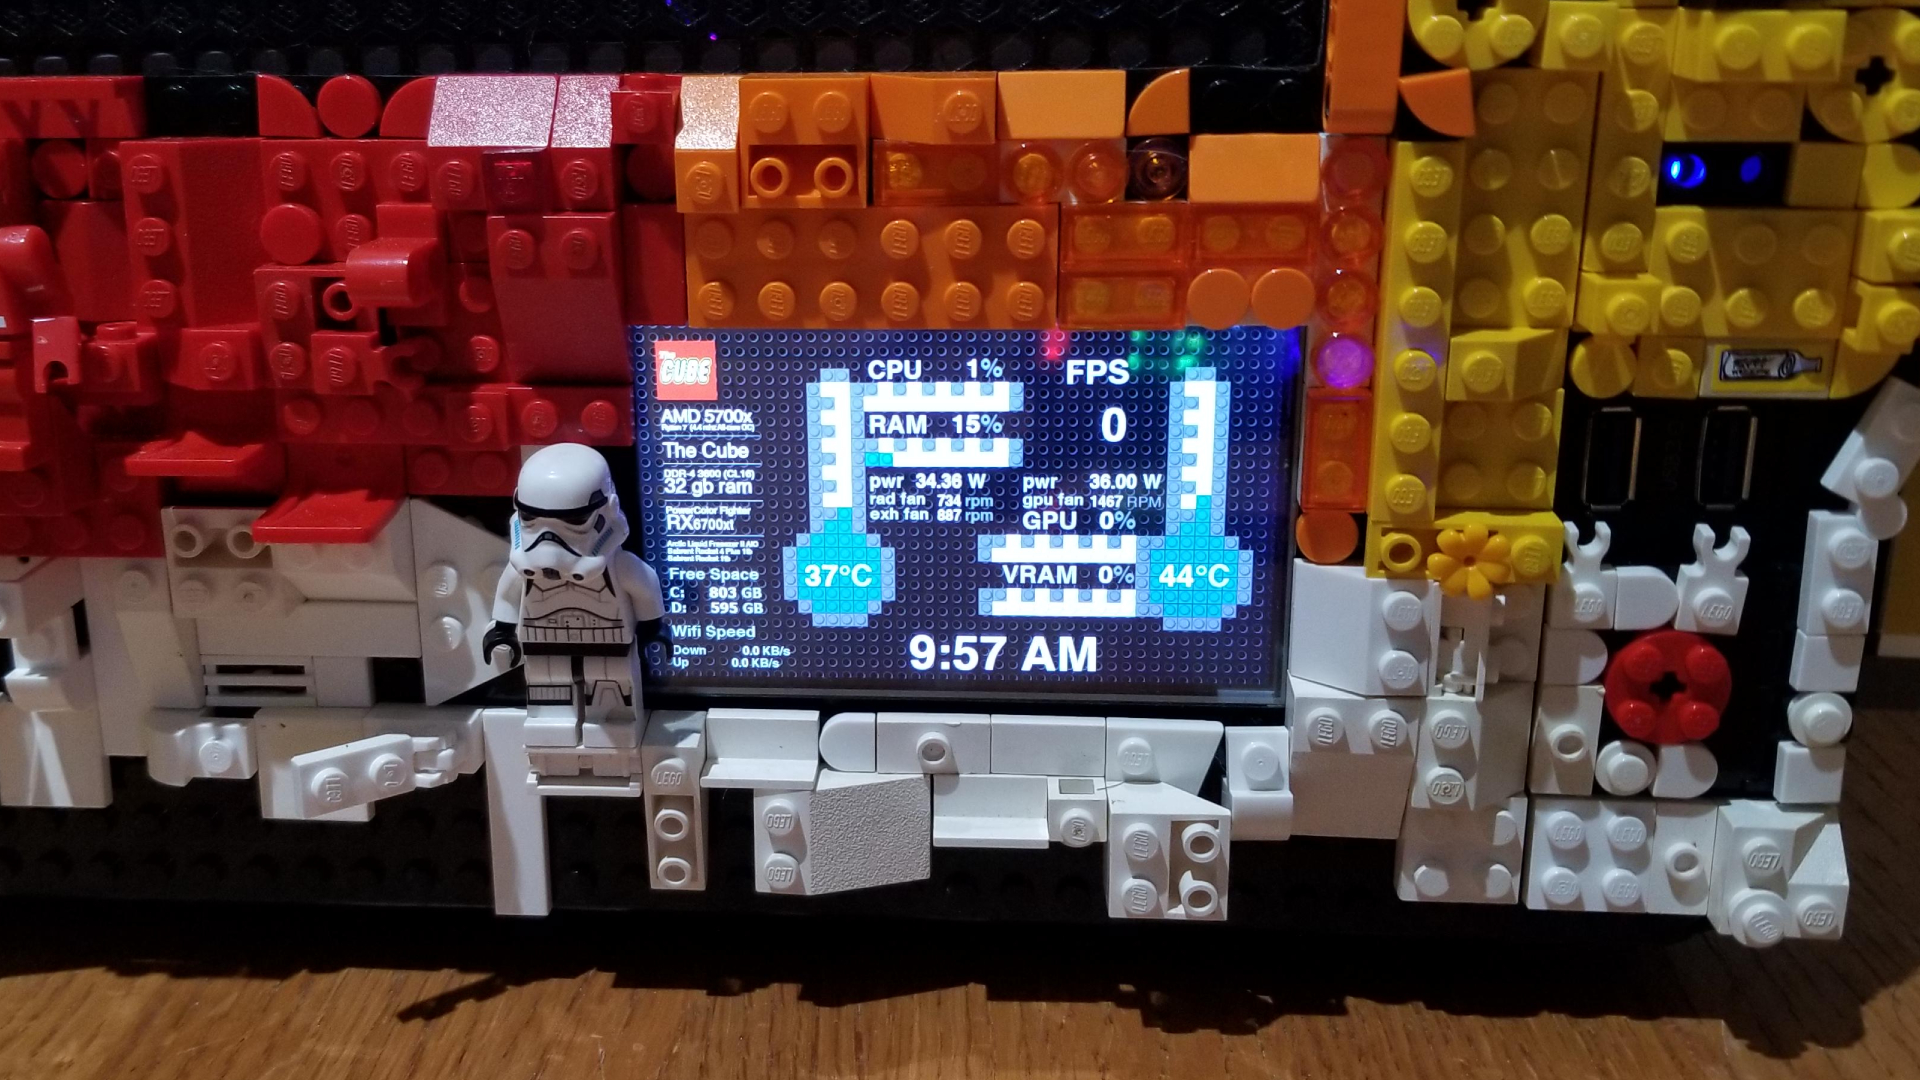 Custom Lego gaming PC with stromtrooper mini figure on left and performance display in centre